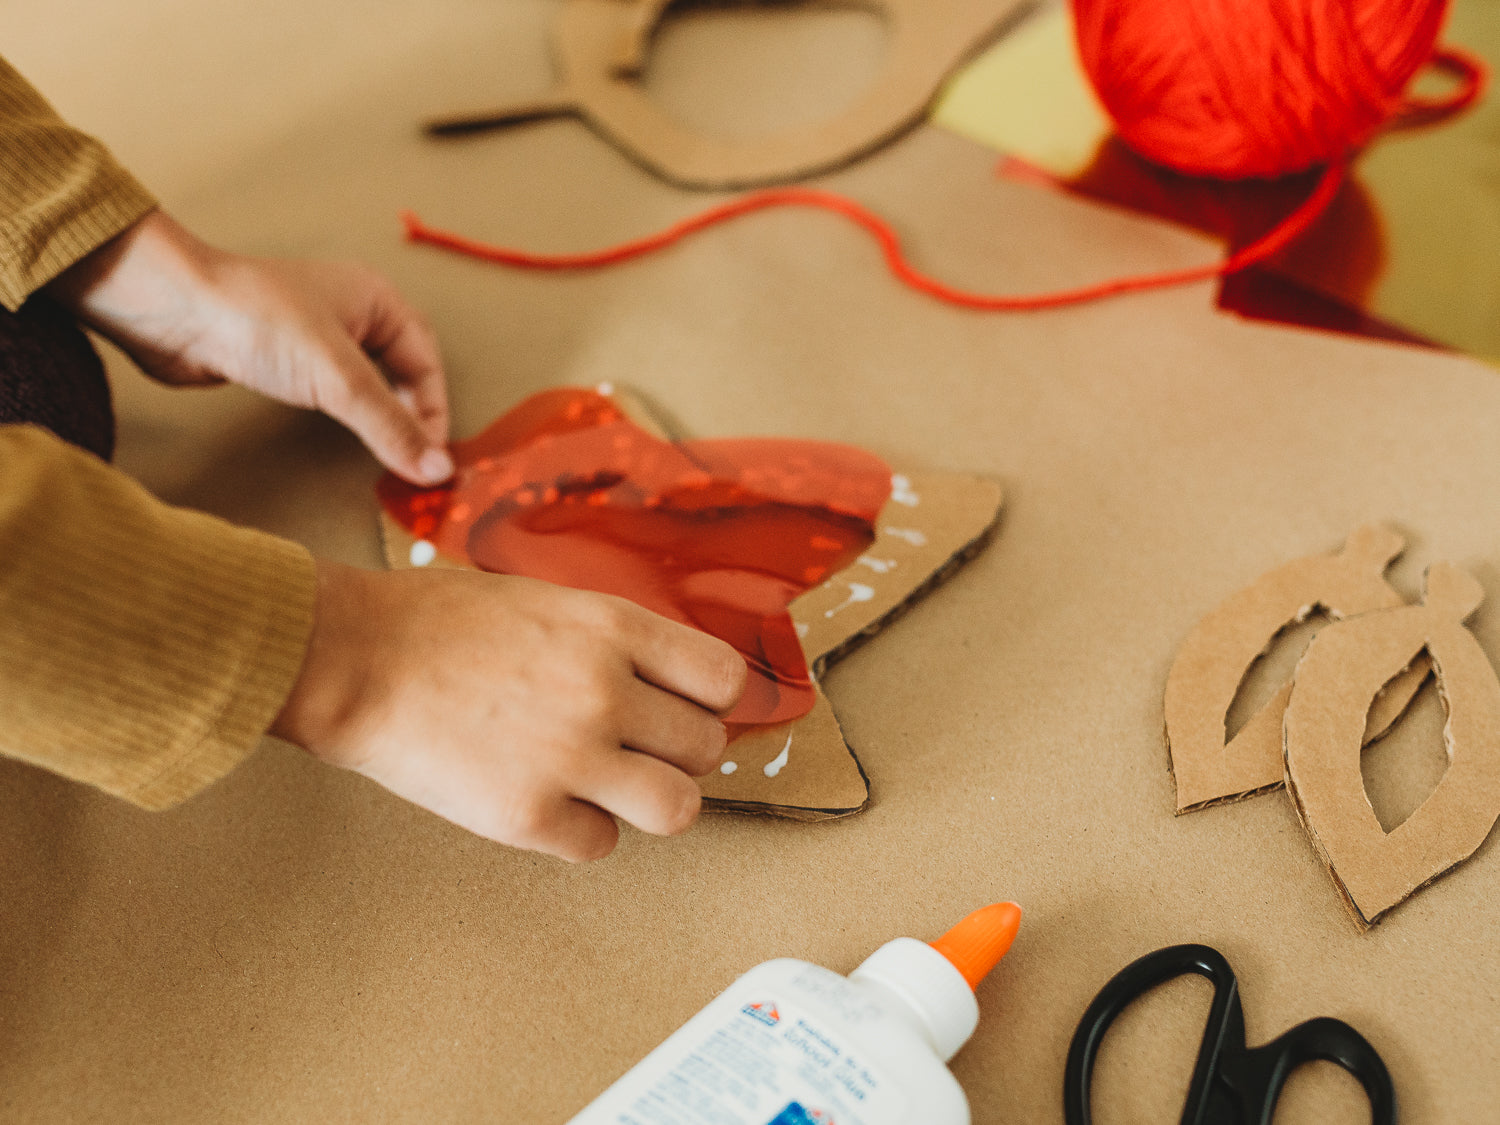 A child glues biodegradable red cellophane to cardboard for an eco-friendly fall craft project.